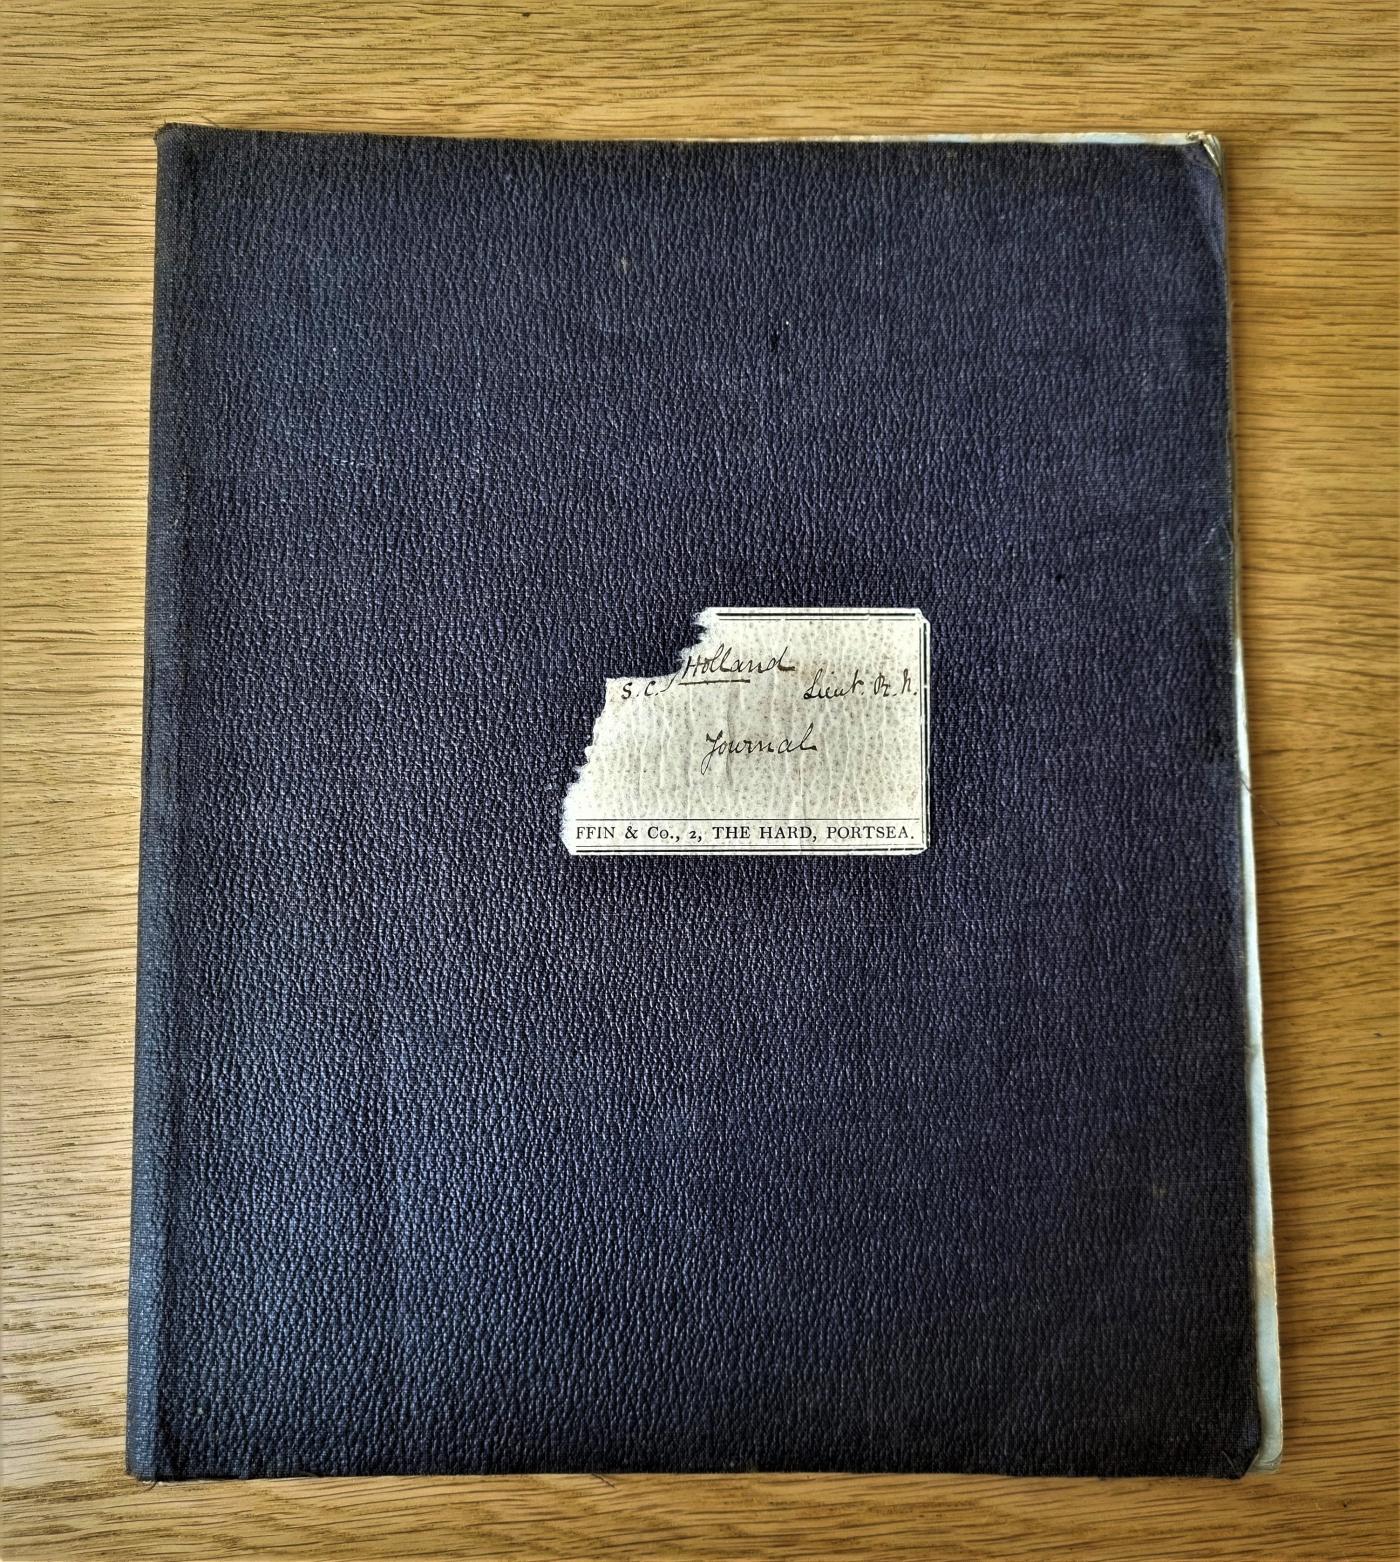 An image showing 'Journal kept on HMS Sylvia, 1871 (RMG reference: HND/101/5)'